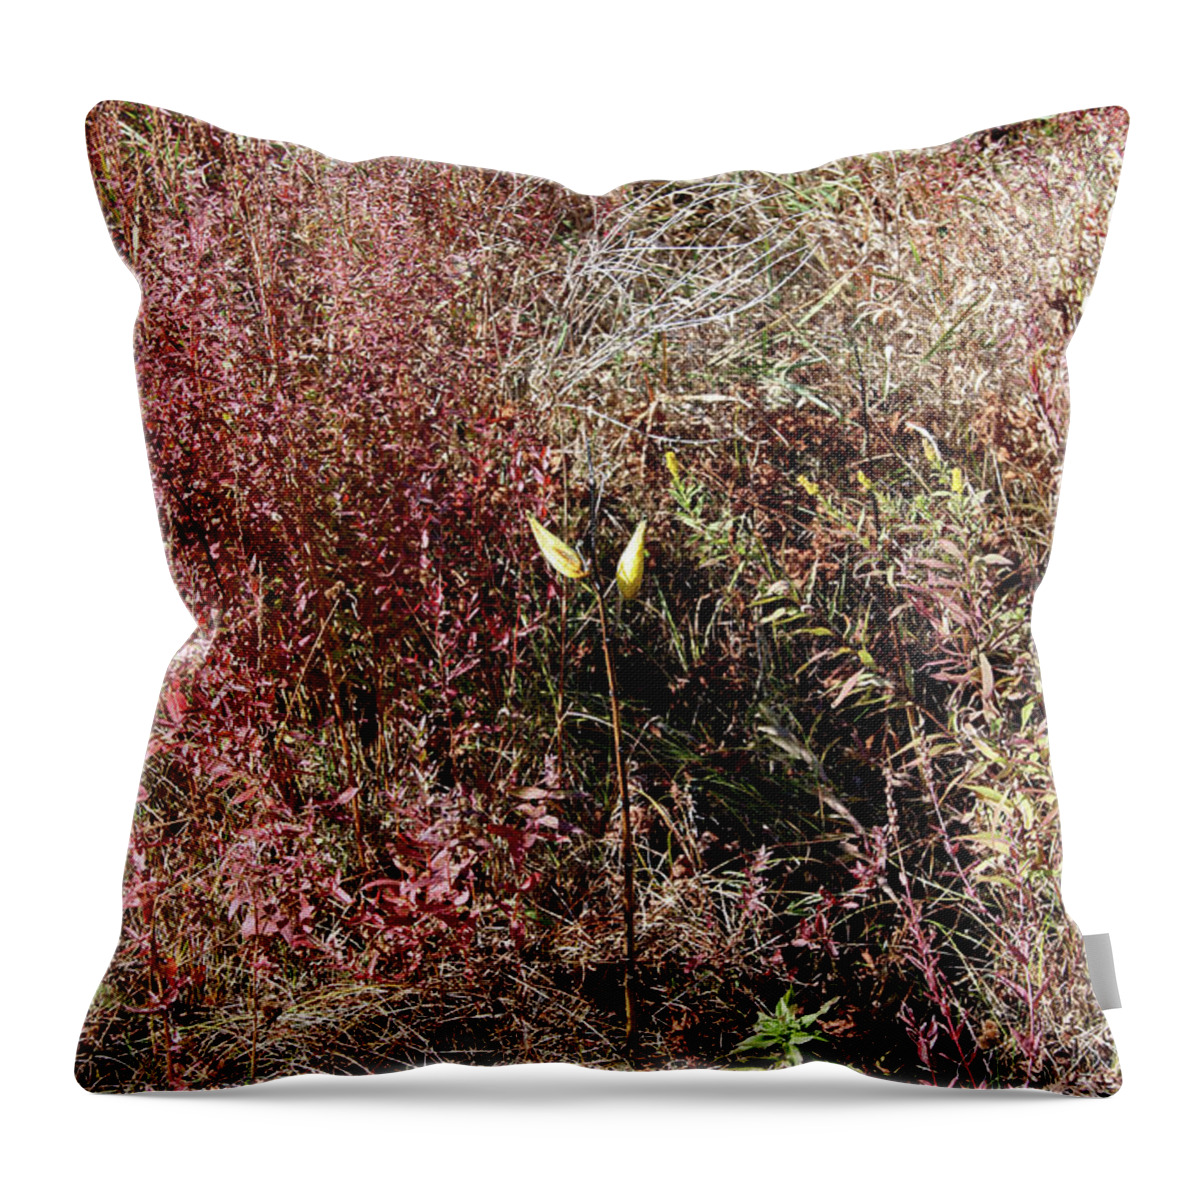  Throw Pillow featuring the photograph Grasses In Fall by Mark Alesse